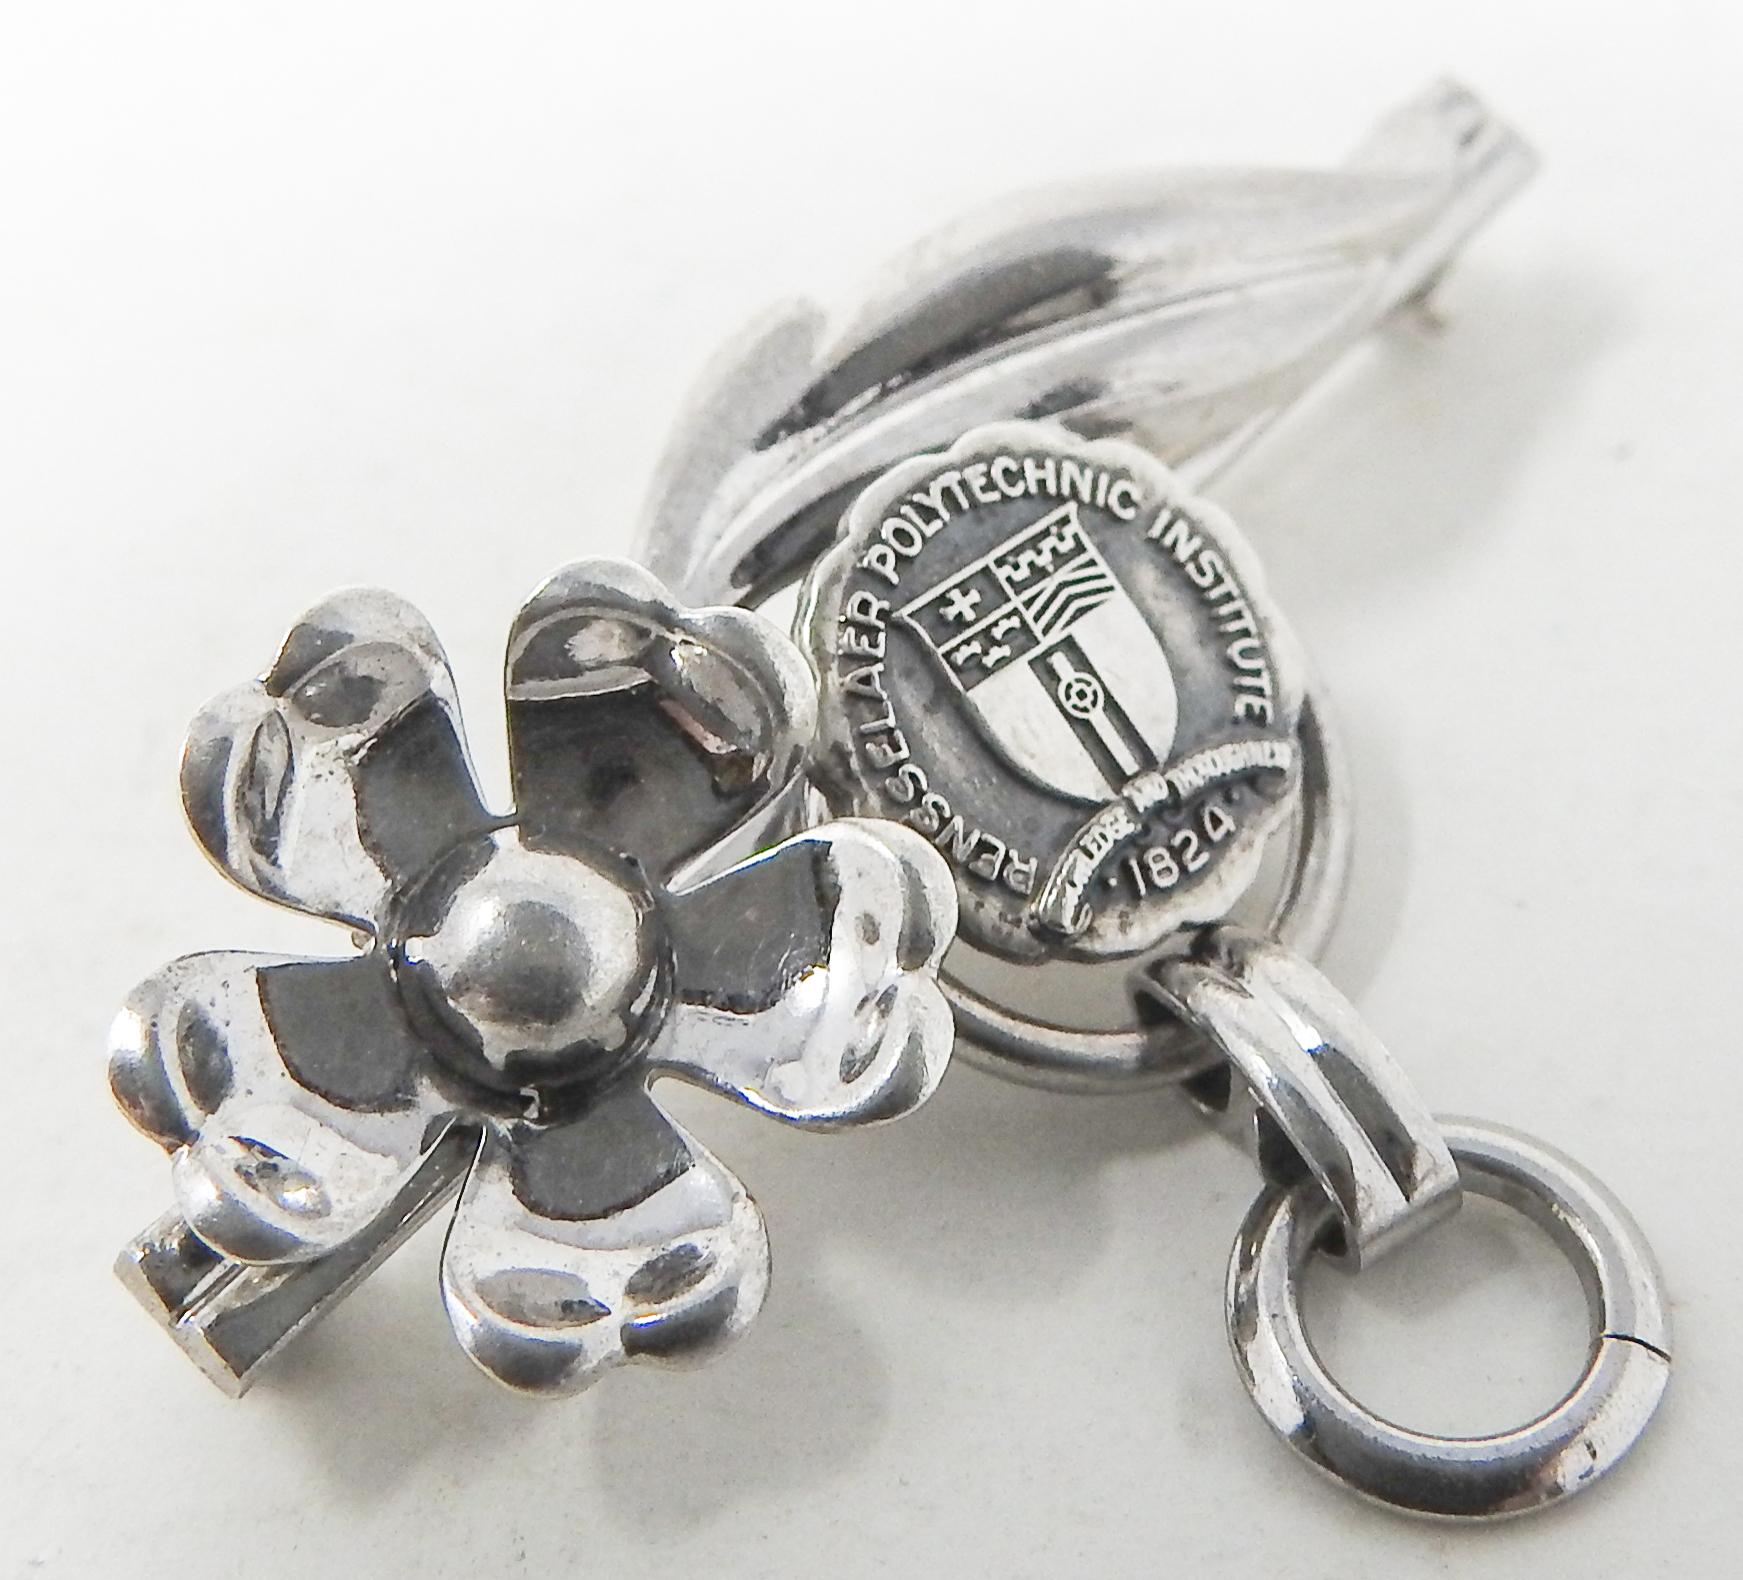 Offering this beautiful sterling silver floral brooch from the Rensselaer Polytechnic Institute. The back is marked VanDell, Sterling. The front has a flower, and a foliate detail with spirals.